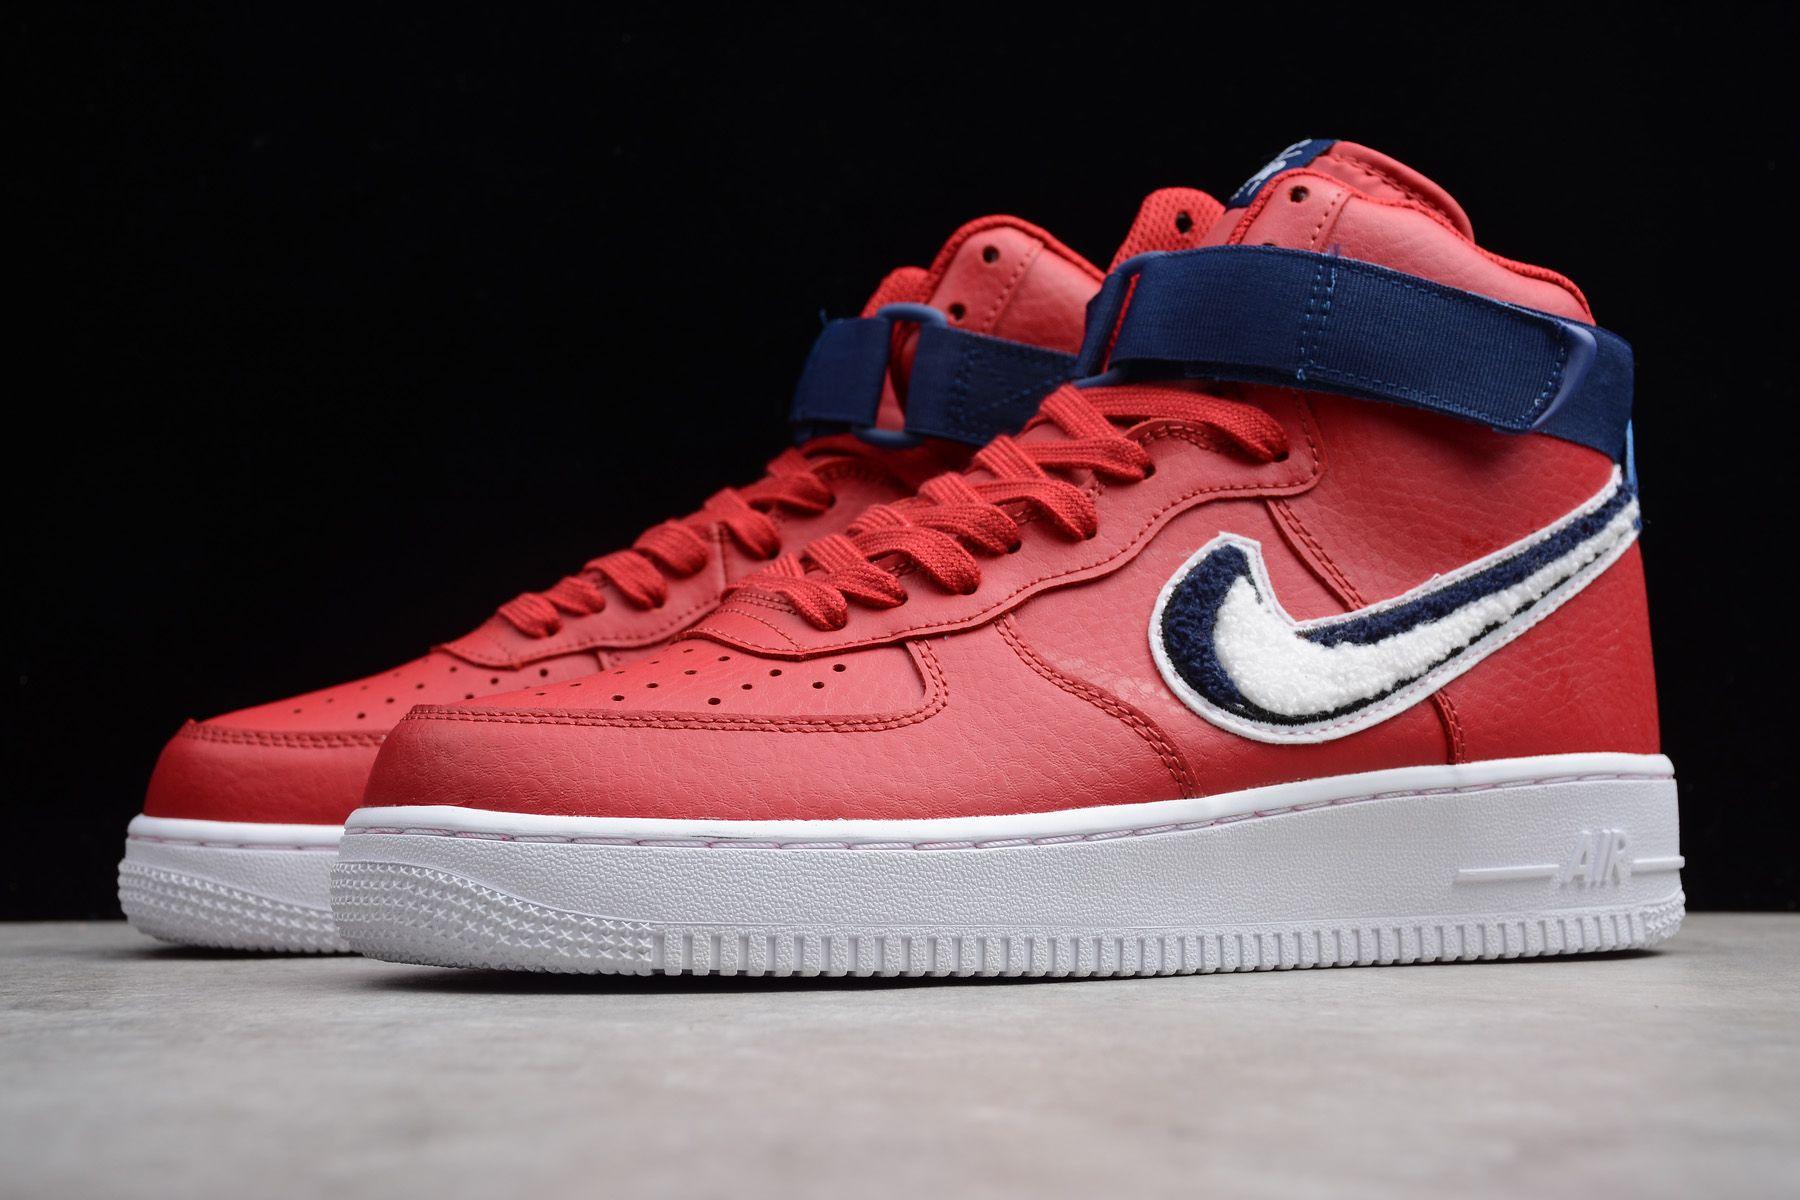 Red White Nike Logo - Nike Air Force 1 High '07 LV8 “Chenille Swoosh” Gym Red White Blue